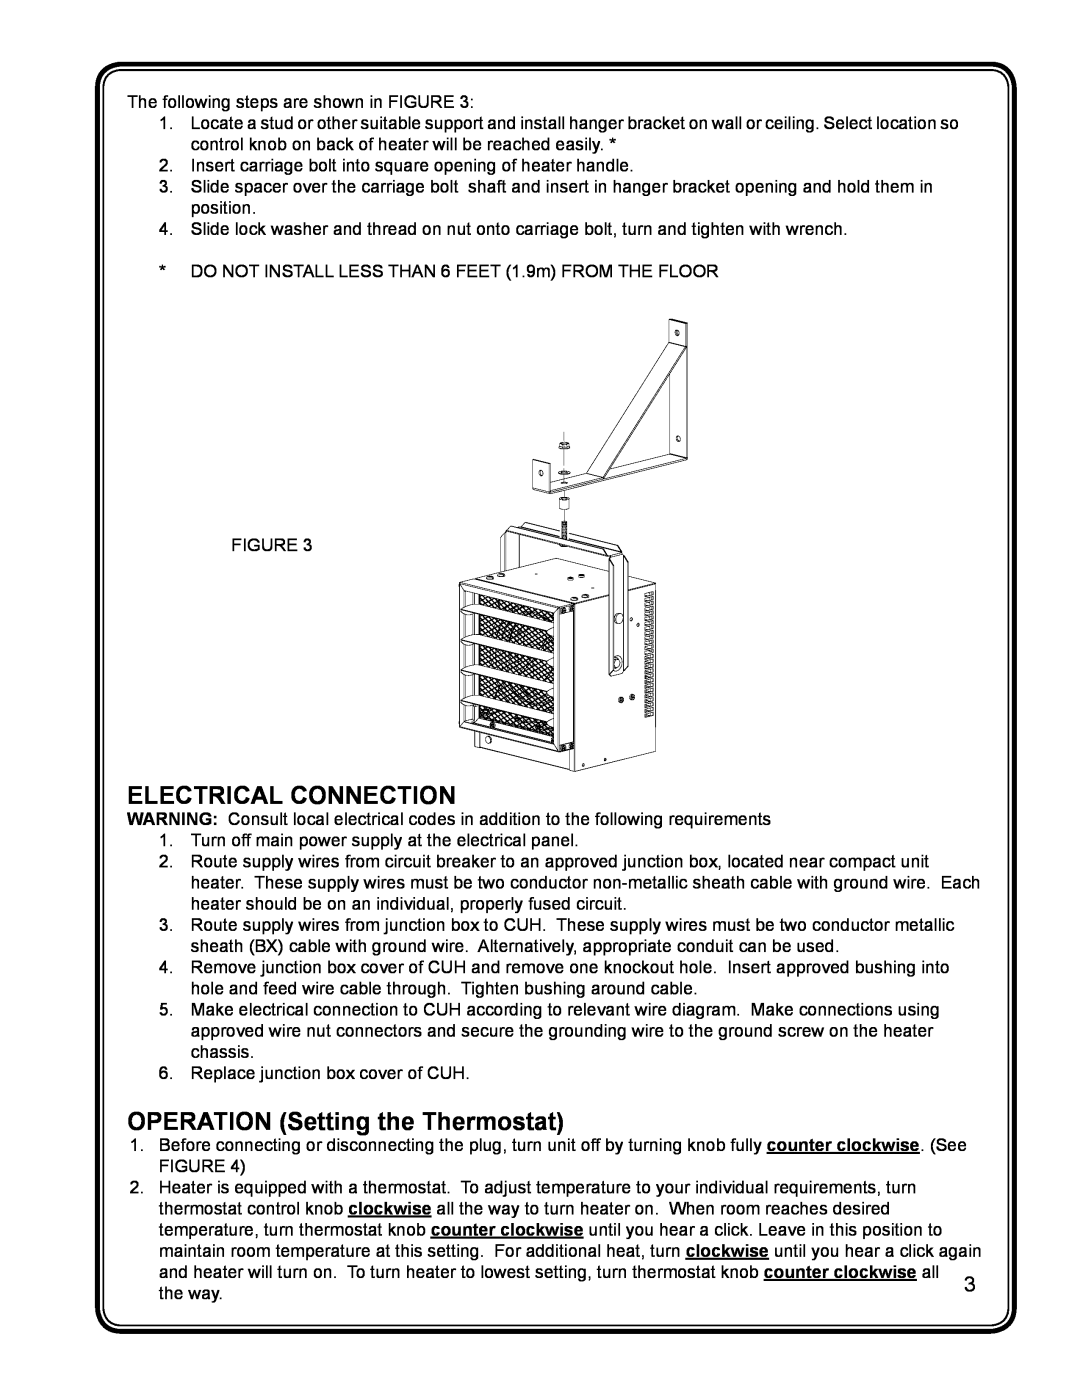 Dimplex CUH05B31T manual Electrical Connection, OPERATION Setting the Thermostat 